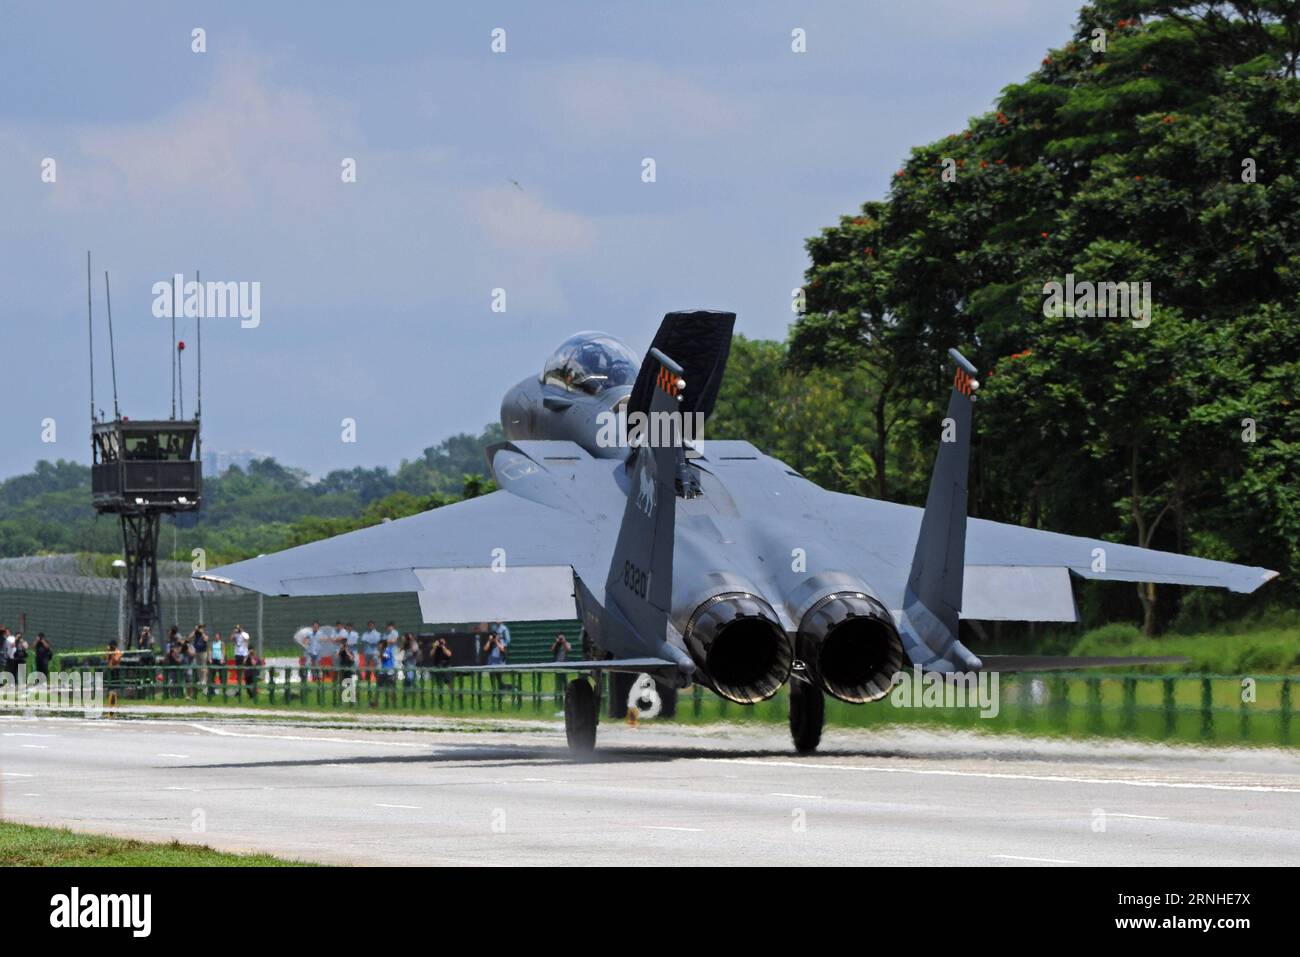 An F-15SG fighter plane of the Republic of Singapore Air Force (RSAF) lands during a rehearsal of exercise Torrent on Singapore s Lim Chu Kang road, Nov. 12, 2016. The Republic of Singapore Air Force (RSAF) Sunday conducted exercise Torrent, in which a public road was converted into a runway for aircraft take-off and landing. The alternate runway exercise, which was last conducted in 2008 and now is in its seventh edition, aims to increase RSAF s aircraft take-off and landing capability. ) (sxk) SINGAPORE-RSAF-EXERCISE TORRENT-REHEARSAL ThenxChihxWey PUBLICATIONxNOTxINxCHN   to F  Fighter Plan Stock Photo